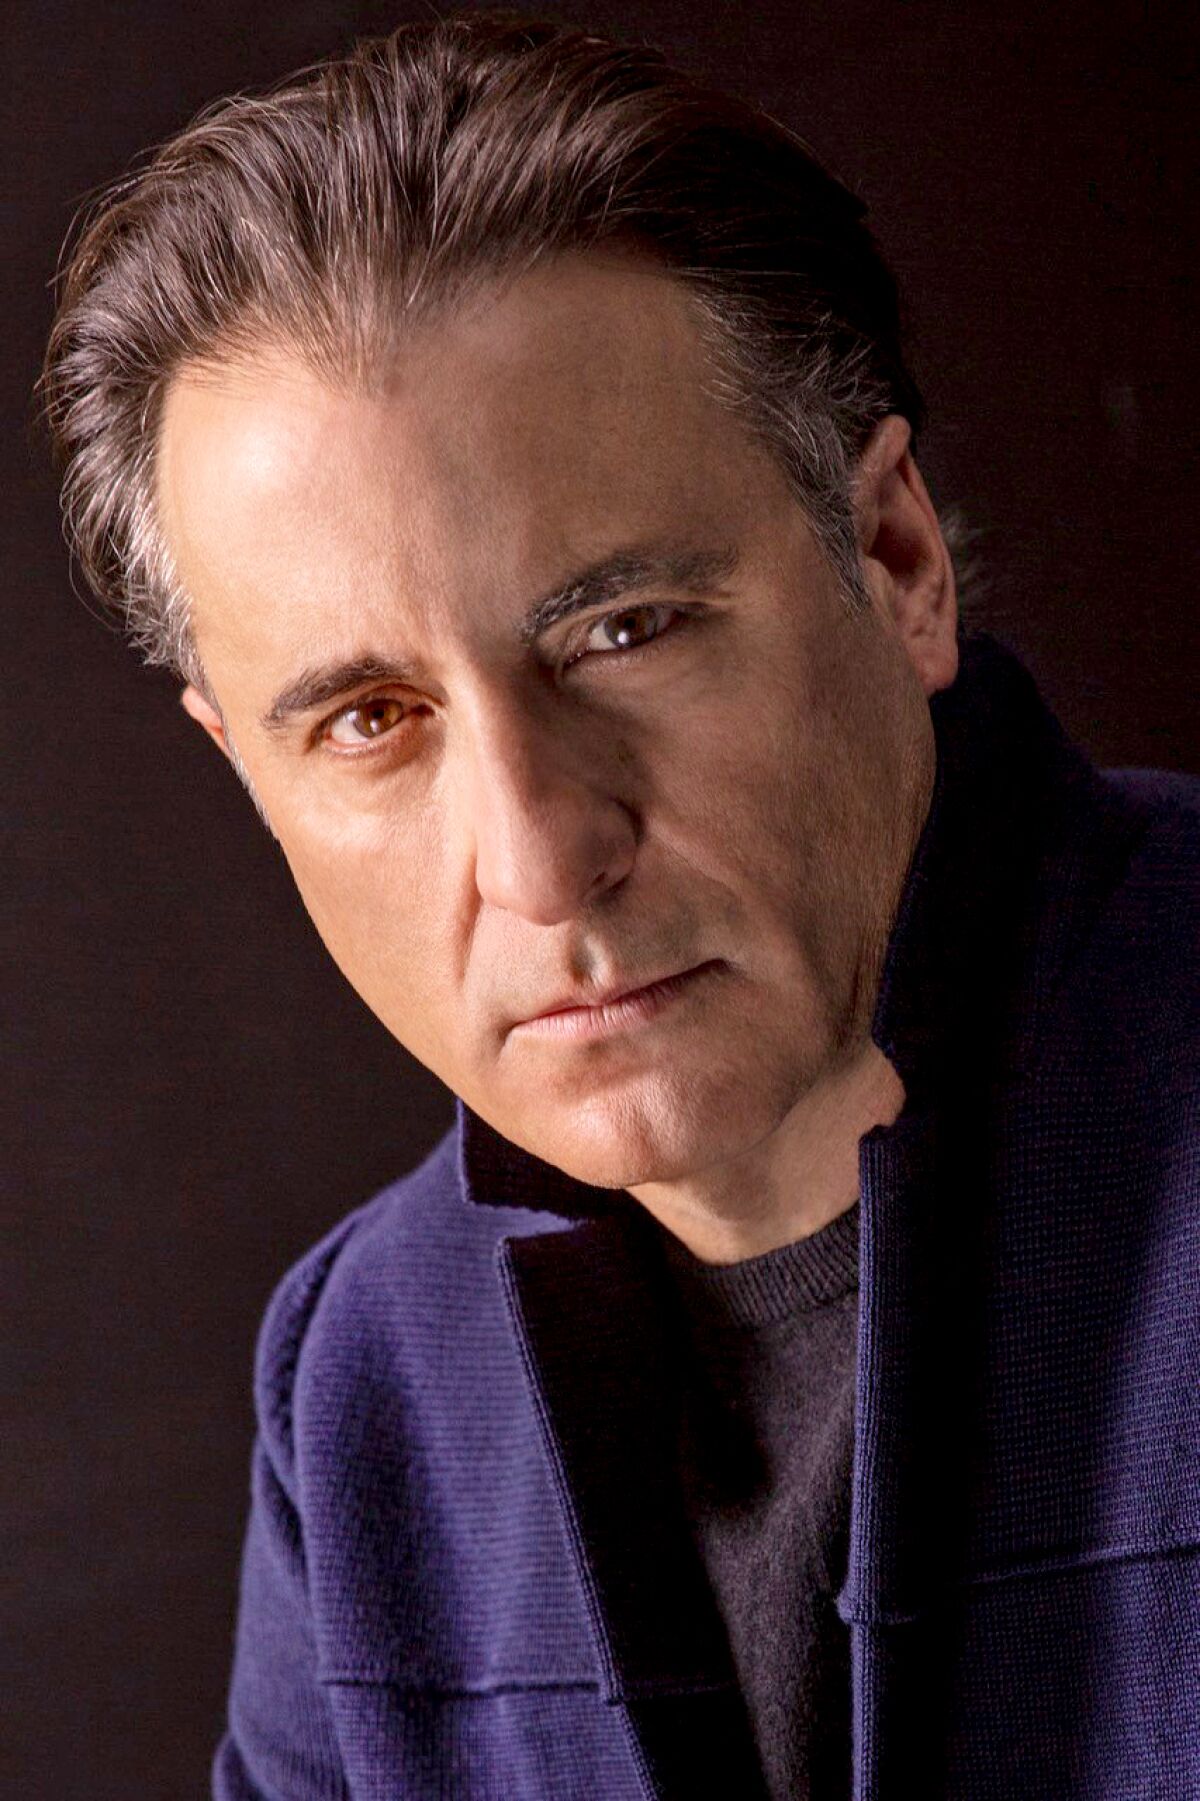 Actor Andy Garcia is scheduled to receive the annual Gregory Peck Award during the San Diego International Film Festival.